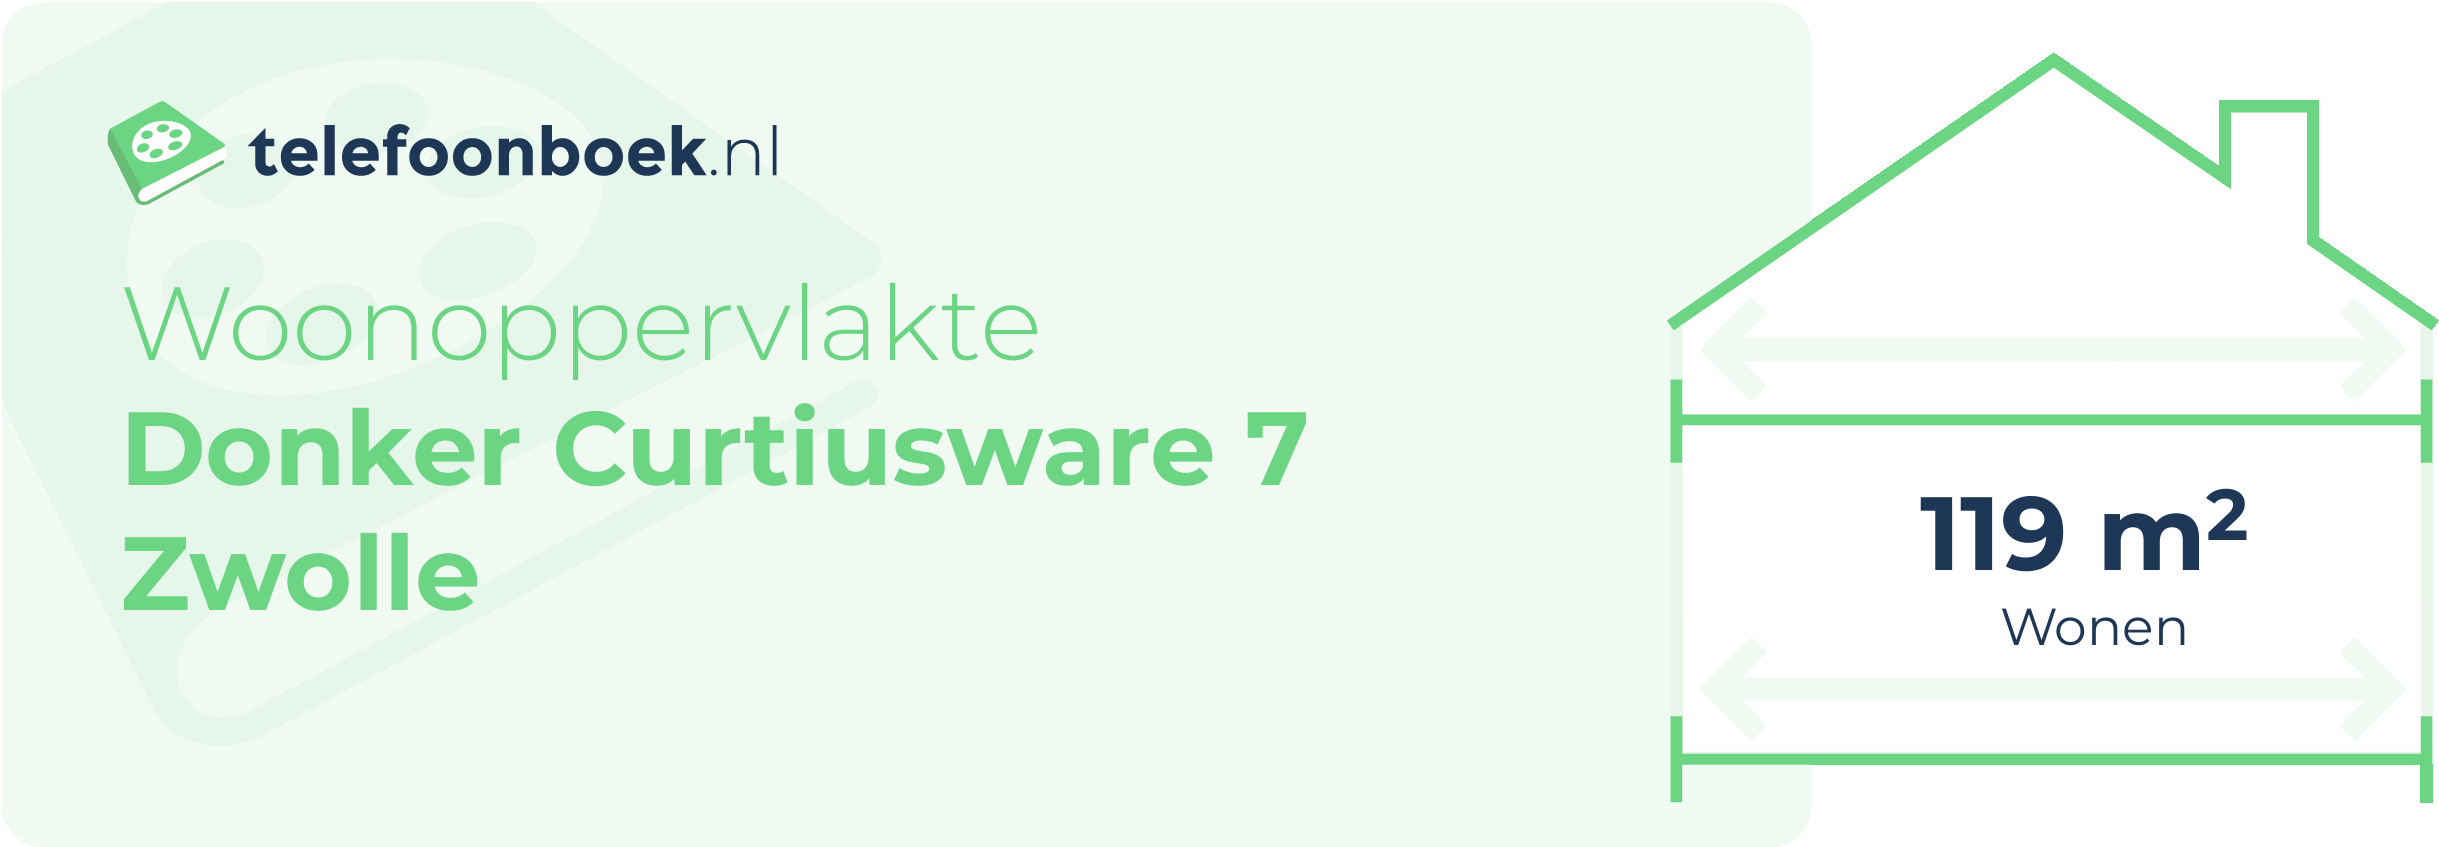 Woonoppervlakte Donker Curtiusware 7 Zwolle